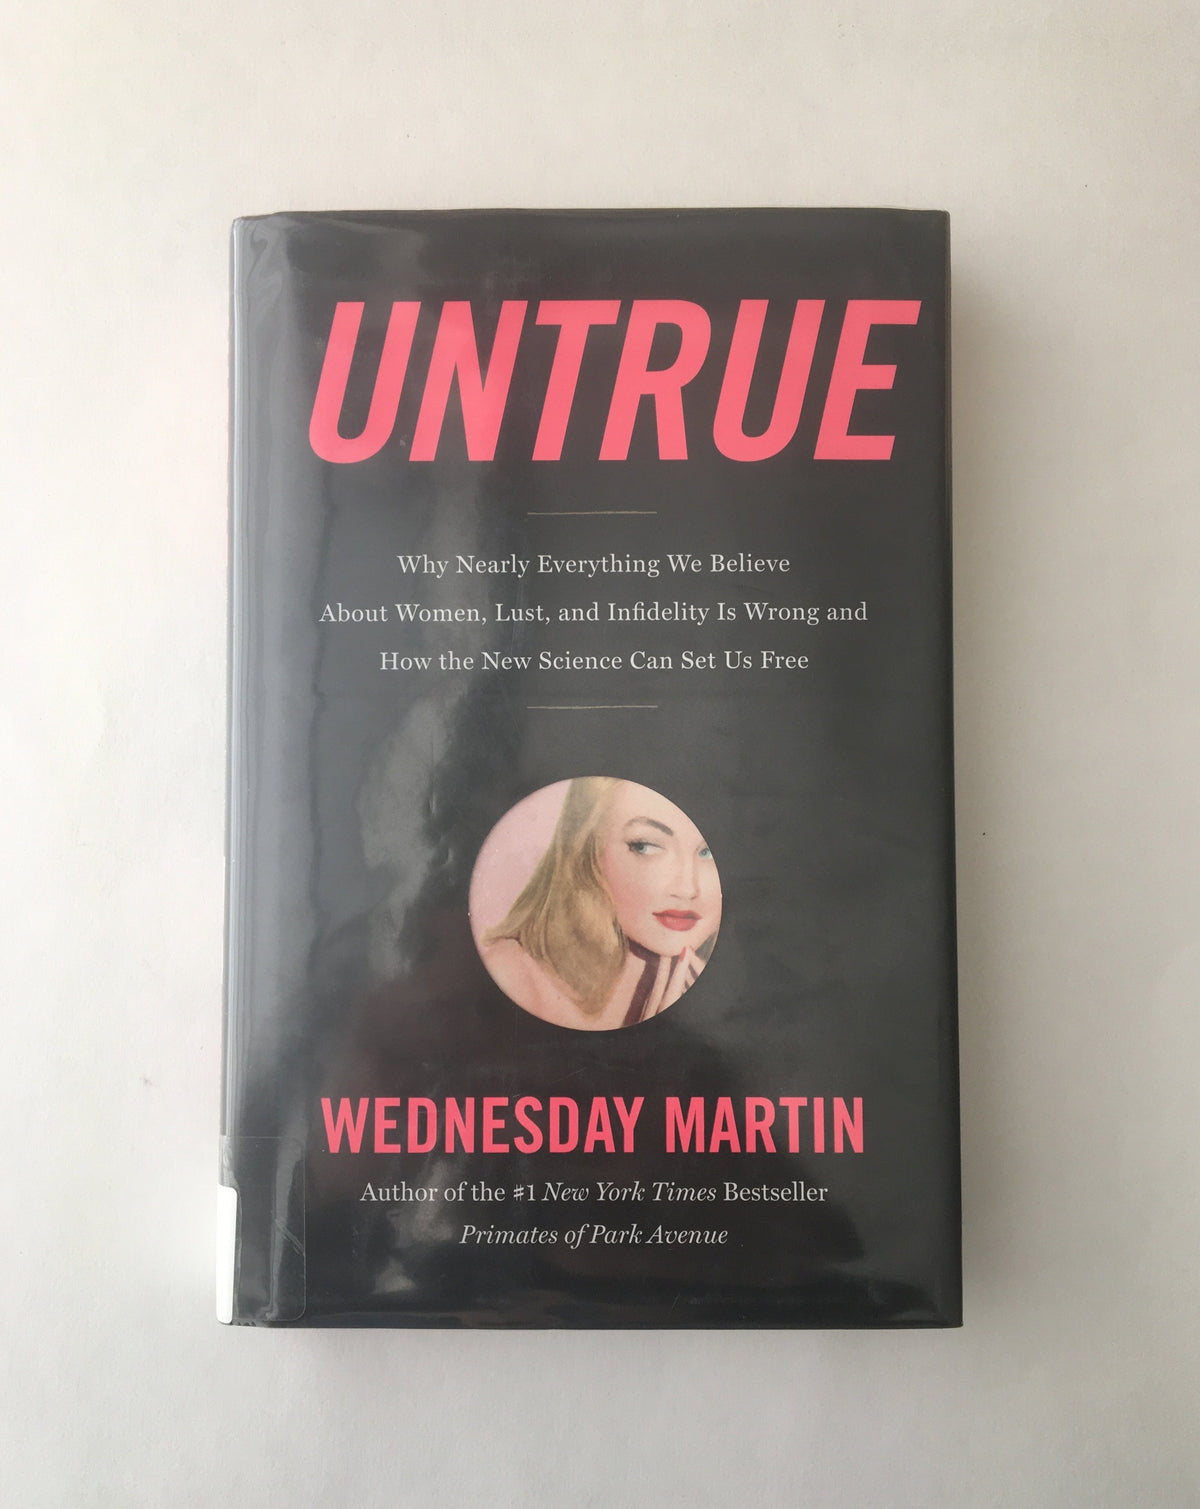 Untrue: why nearly everything we believe about women, lust, and infidelity is wrong and how the new science can set us free by Wednesday Martin